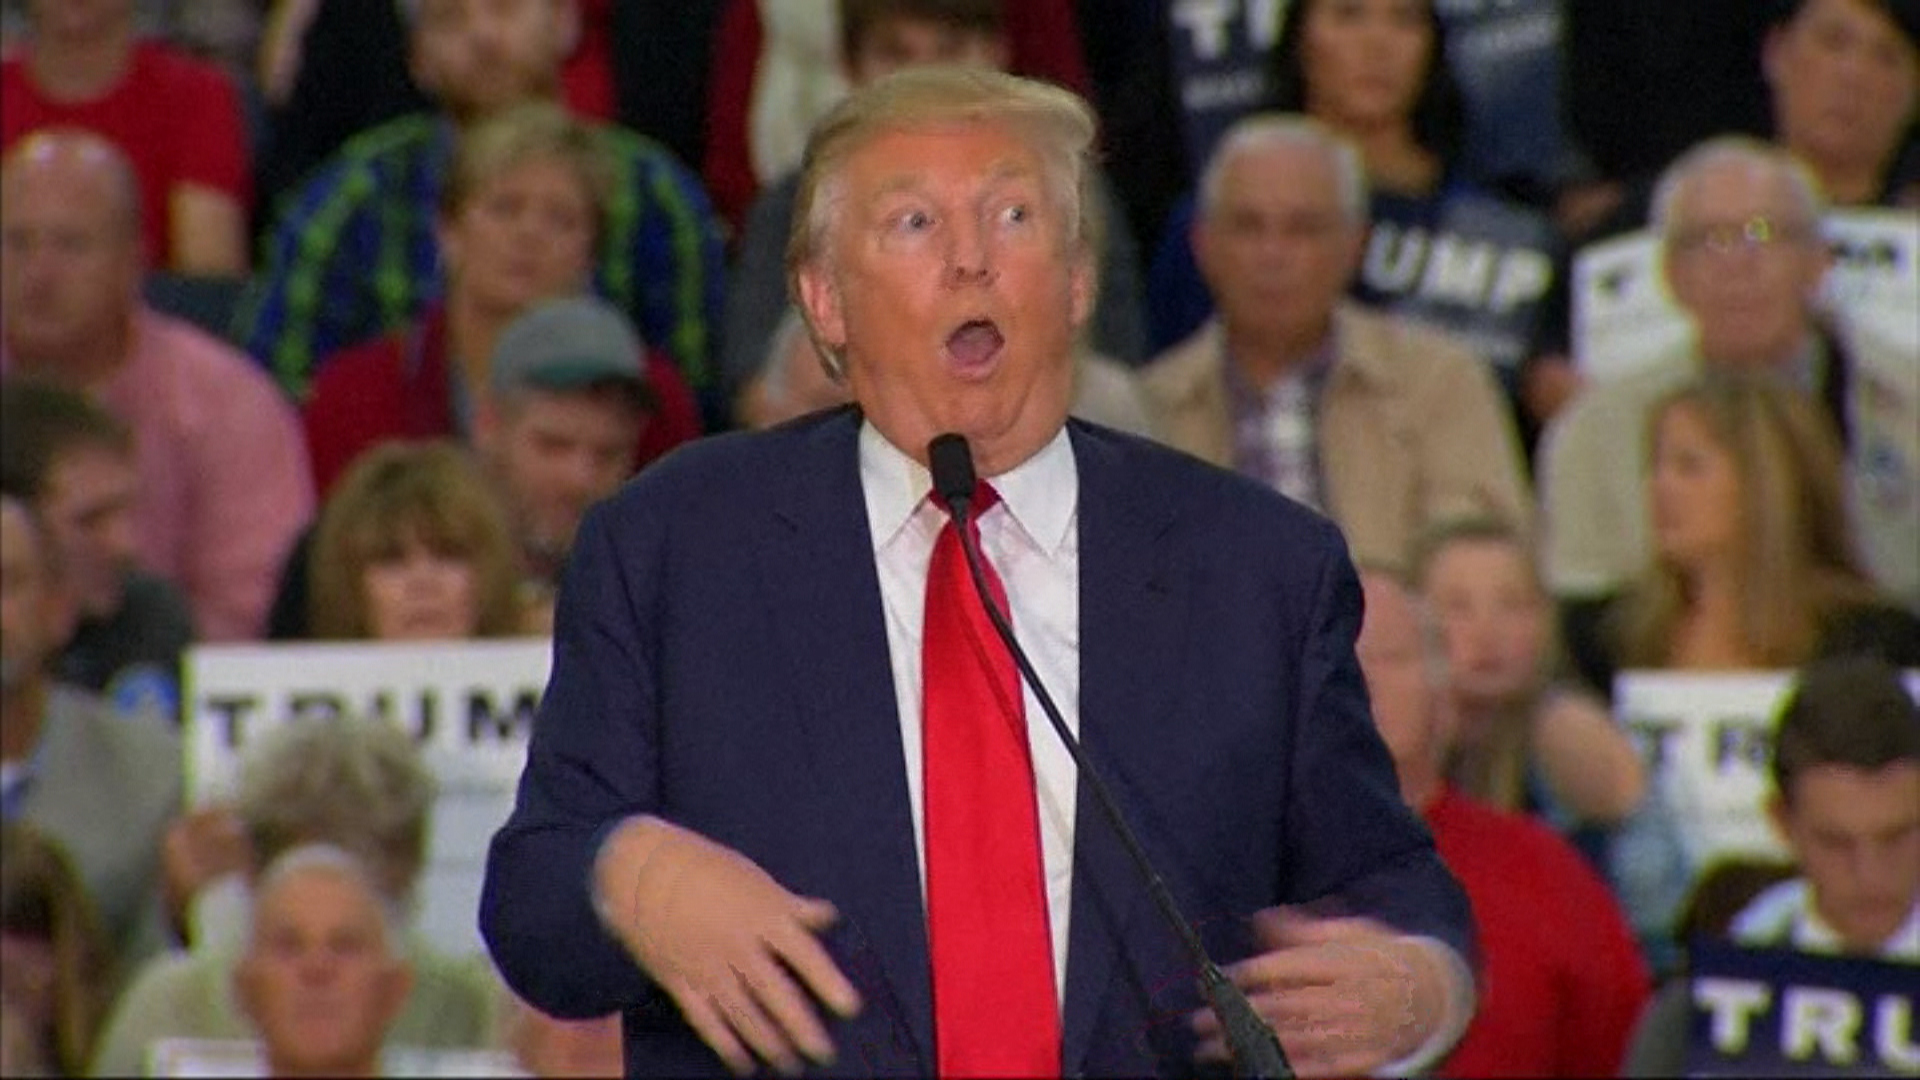 Donald Trump's Worst Offense? Mocking Disabled Reporter, Poll Finds